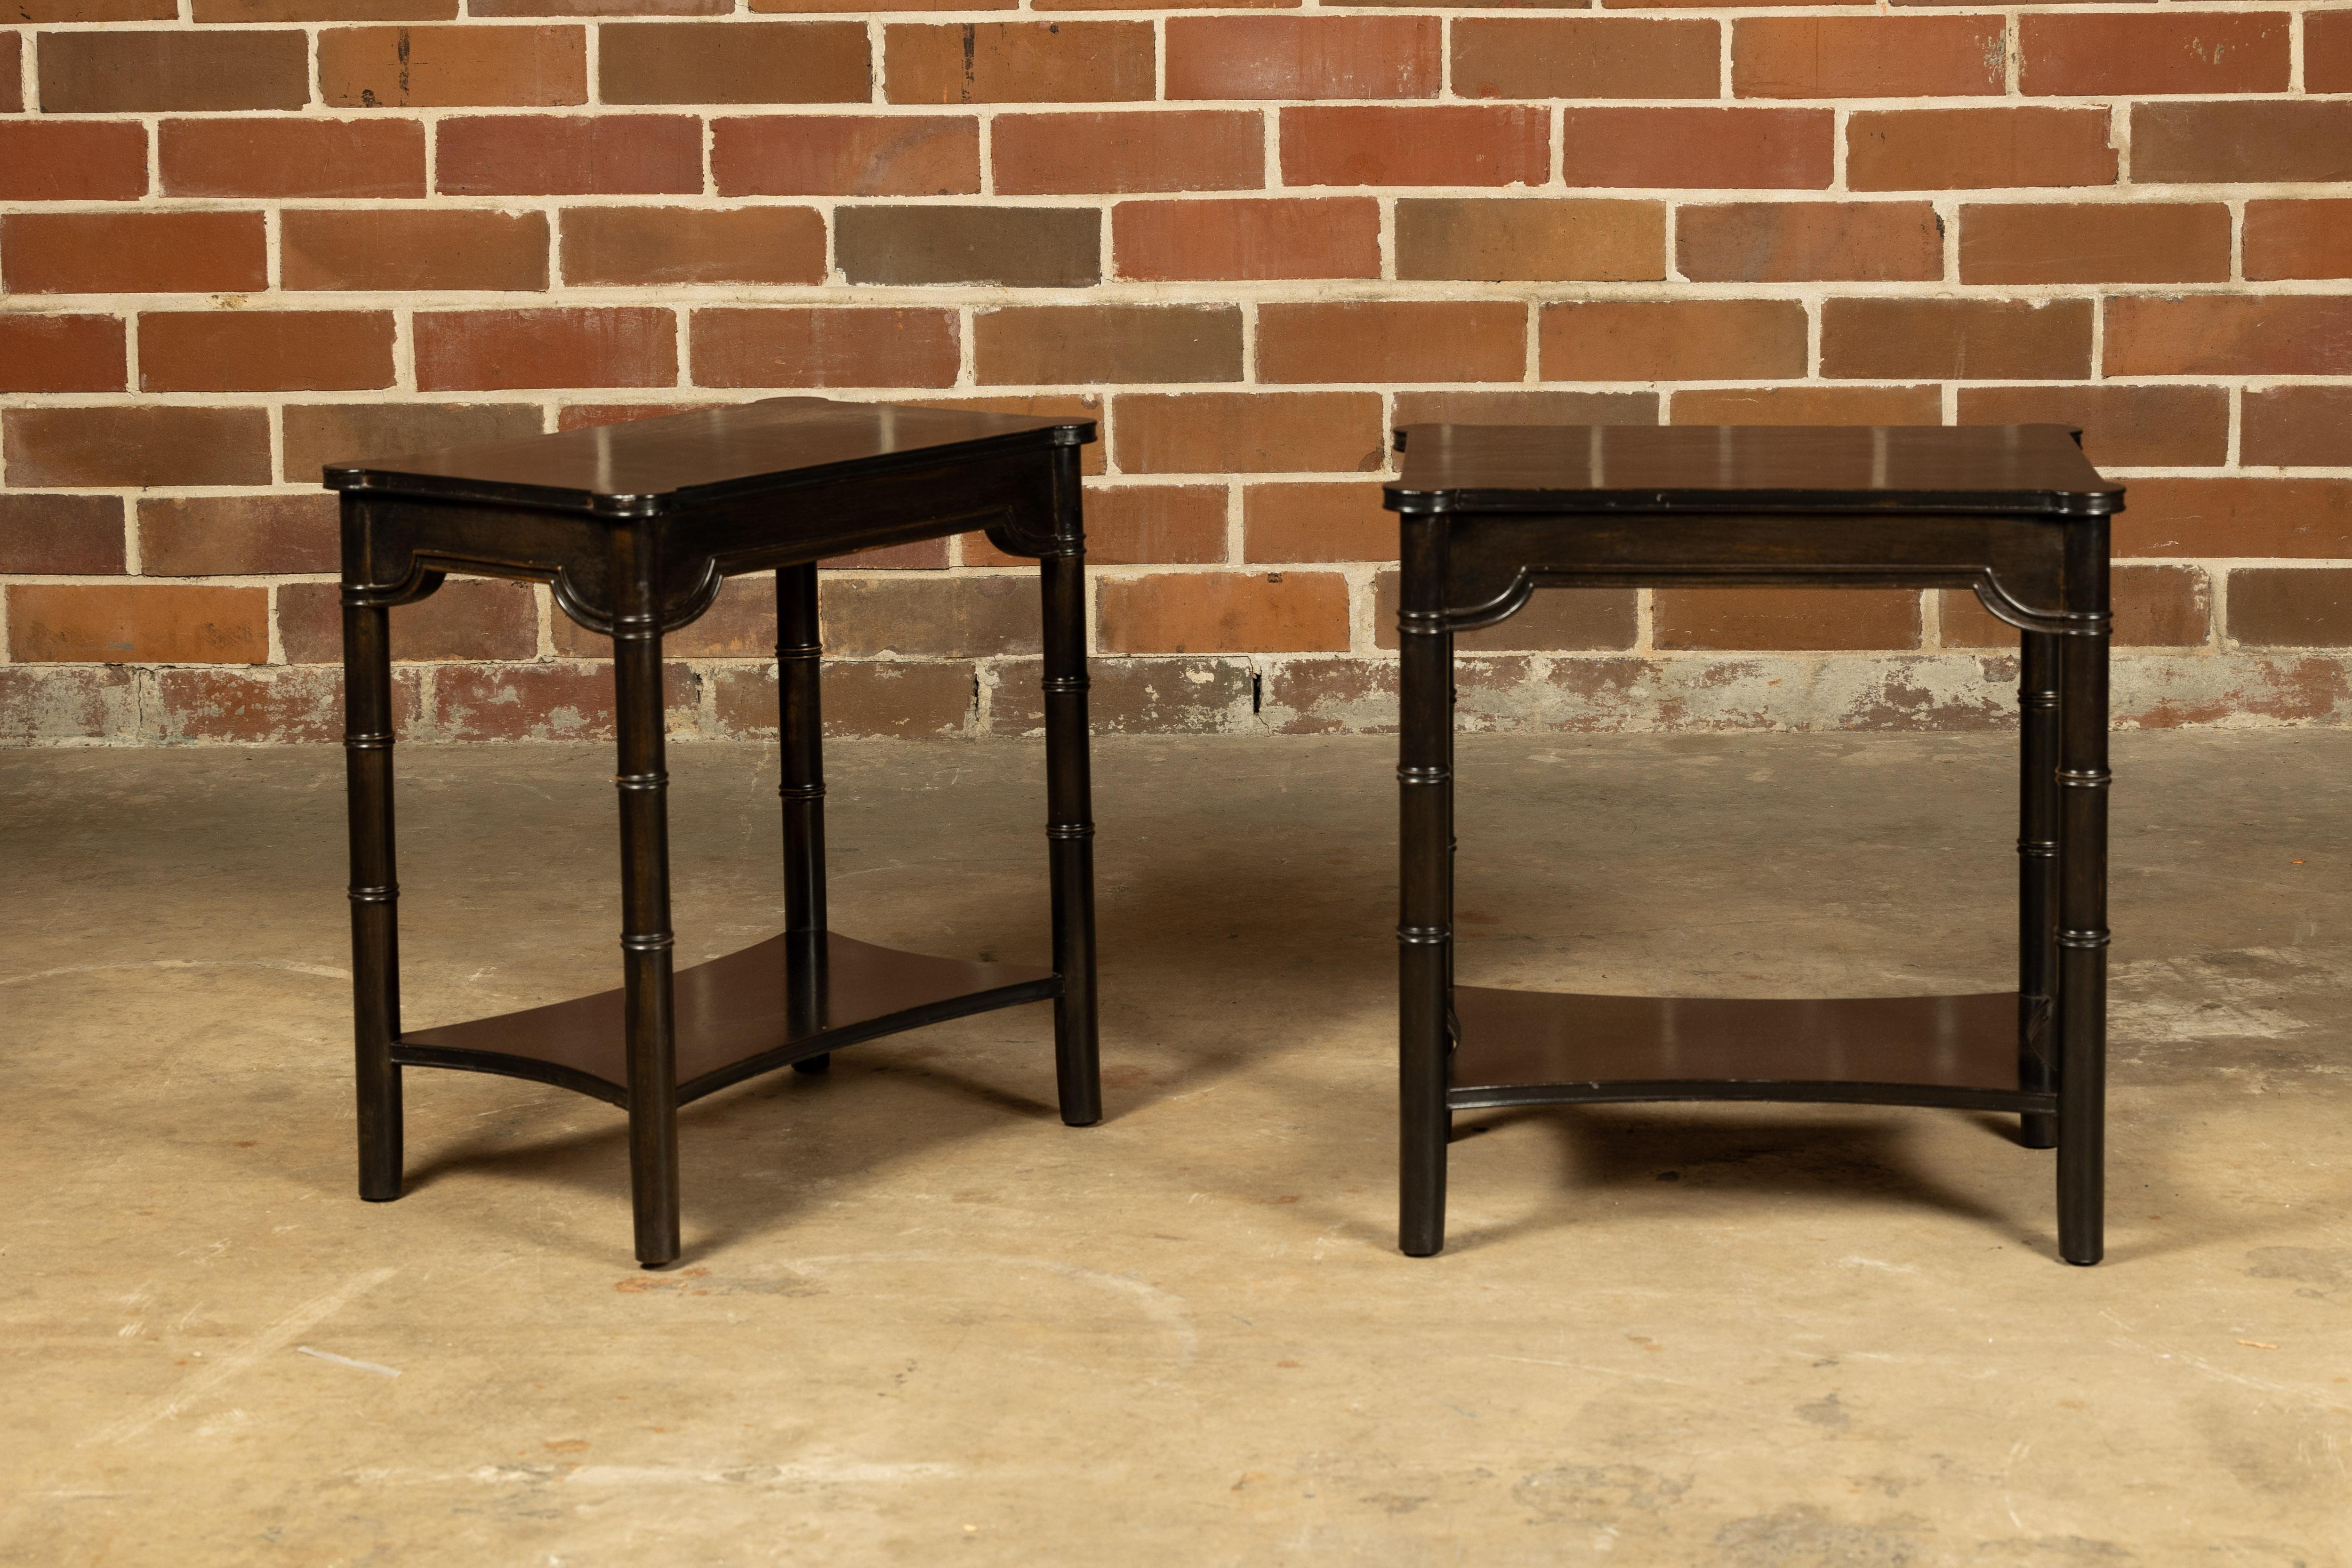 A pair of English ebonized faux bamboo side tables from the mid 20th century with simply carved aprons and low shelves. Immerse yourself in the timeless elegance of these English ebonized faux bamboo side tables, a charming pair from the mid-20th